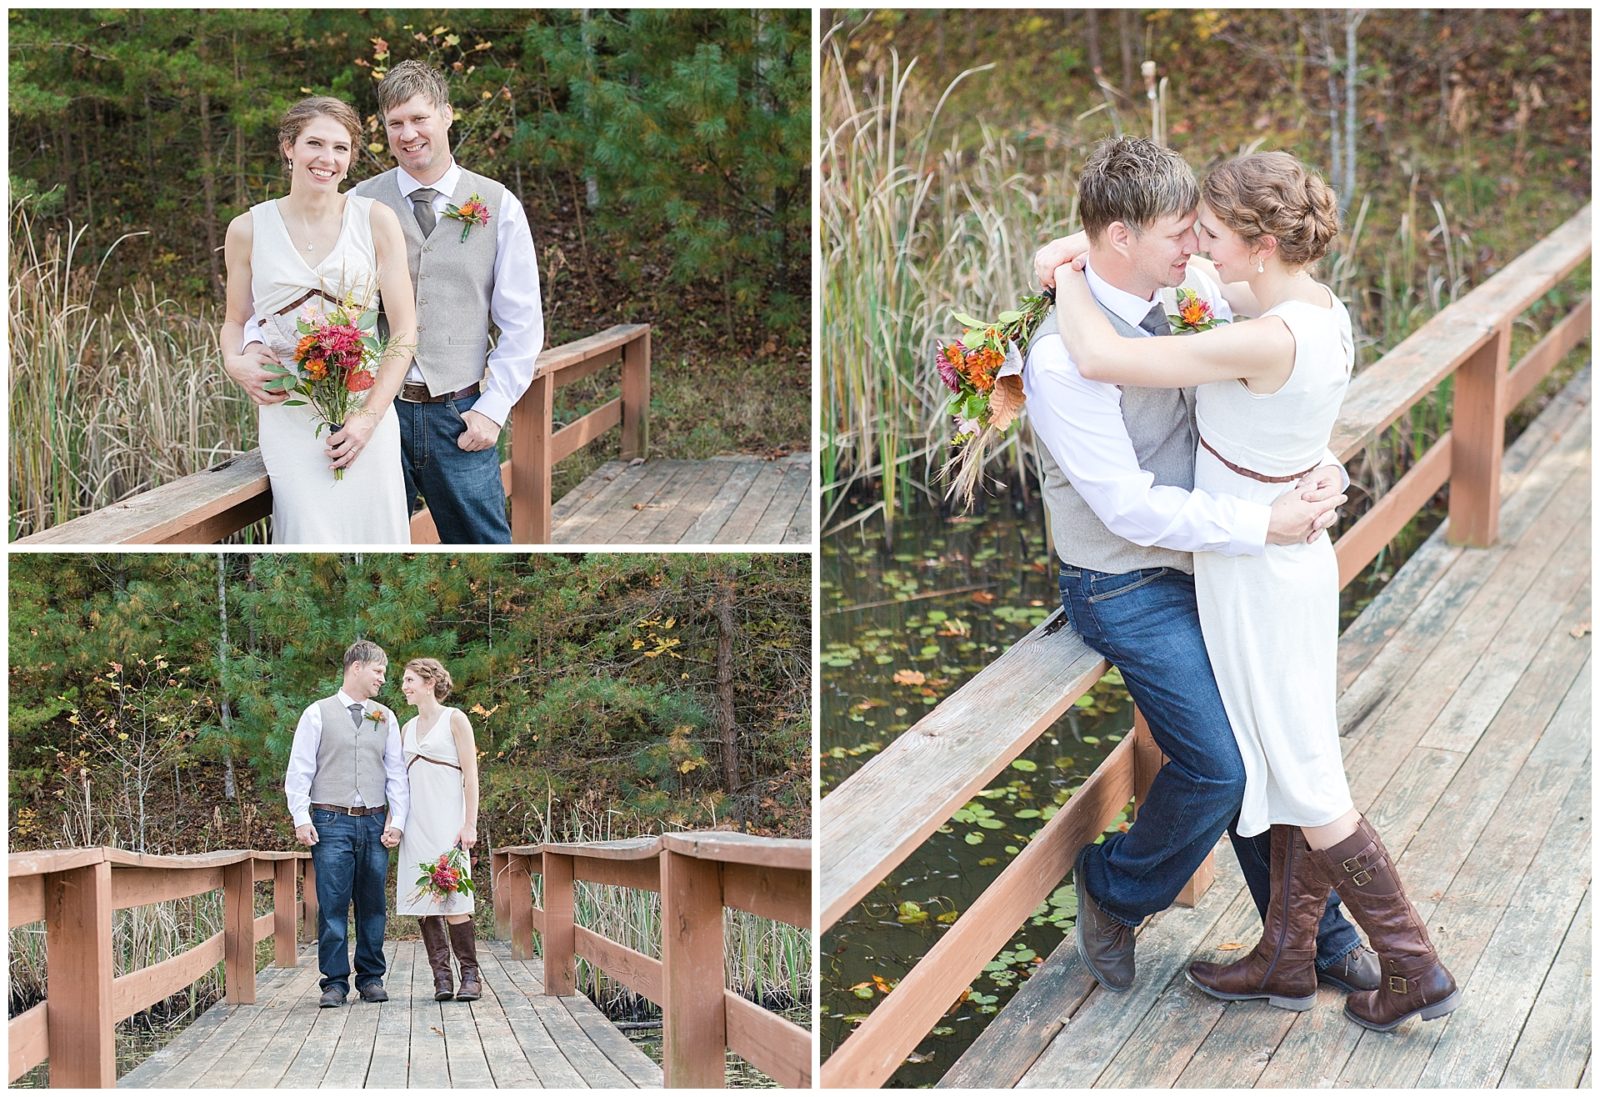 Fall wedding in the Red River Gorge at the Cliffview Resort in Campton, Kentucky. The fall colors during their outdoor ceremony were absolutely spectacular. Photo by: Kevin and Anna Photography www.kevinandannaweddings.com